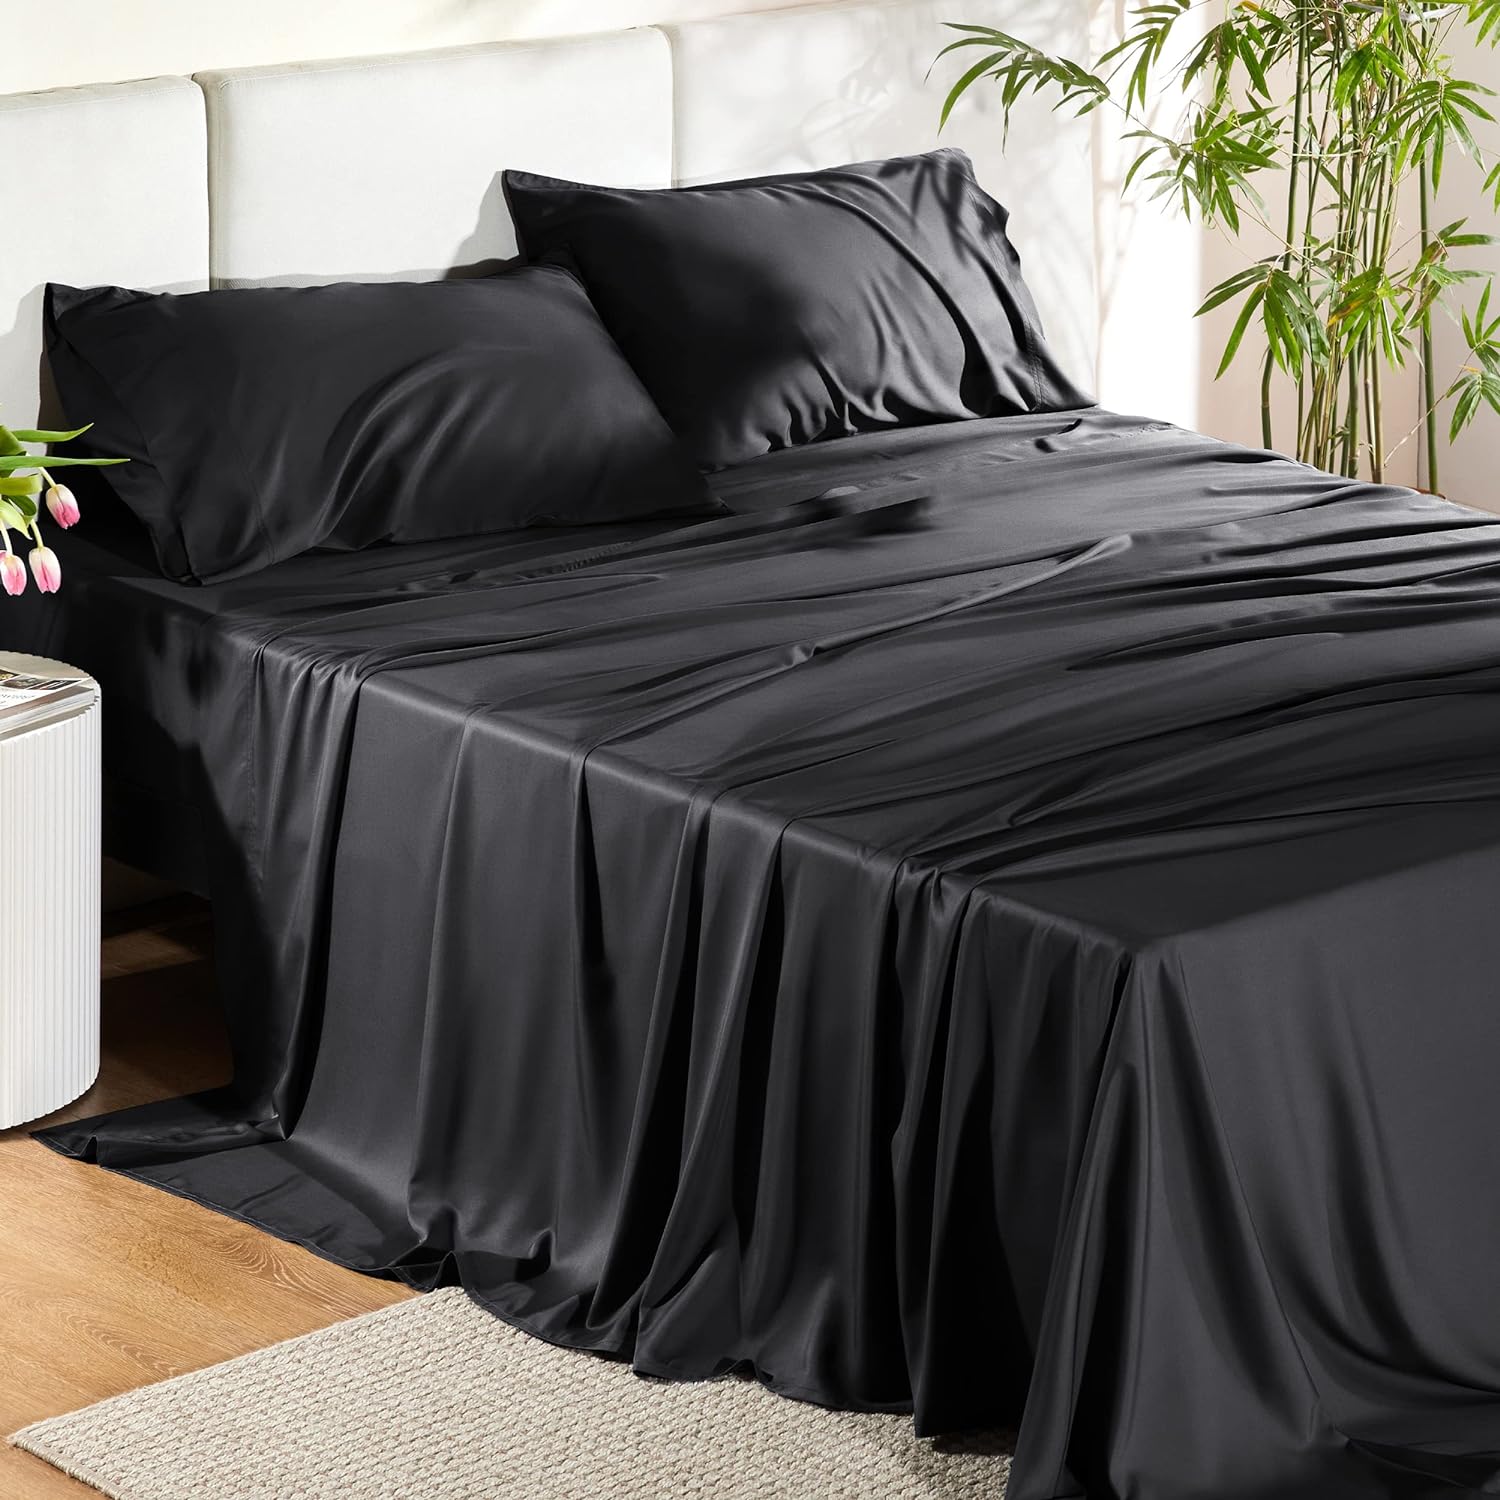 Bedsure King Size Sheet Set, Cooling Sheets King, Rayon Derived from Bamboo, Deep Pocket Up to 16, Breathable & Soft Bed Sheets, Hotel Luxury Silky Bedding Sheets & Pillowcases, Black